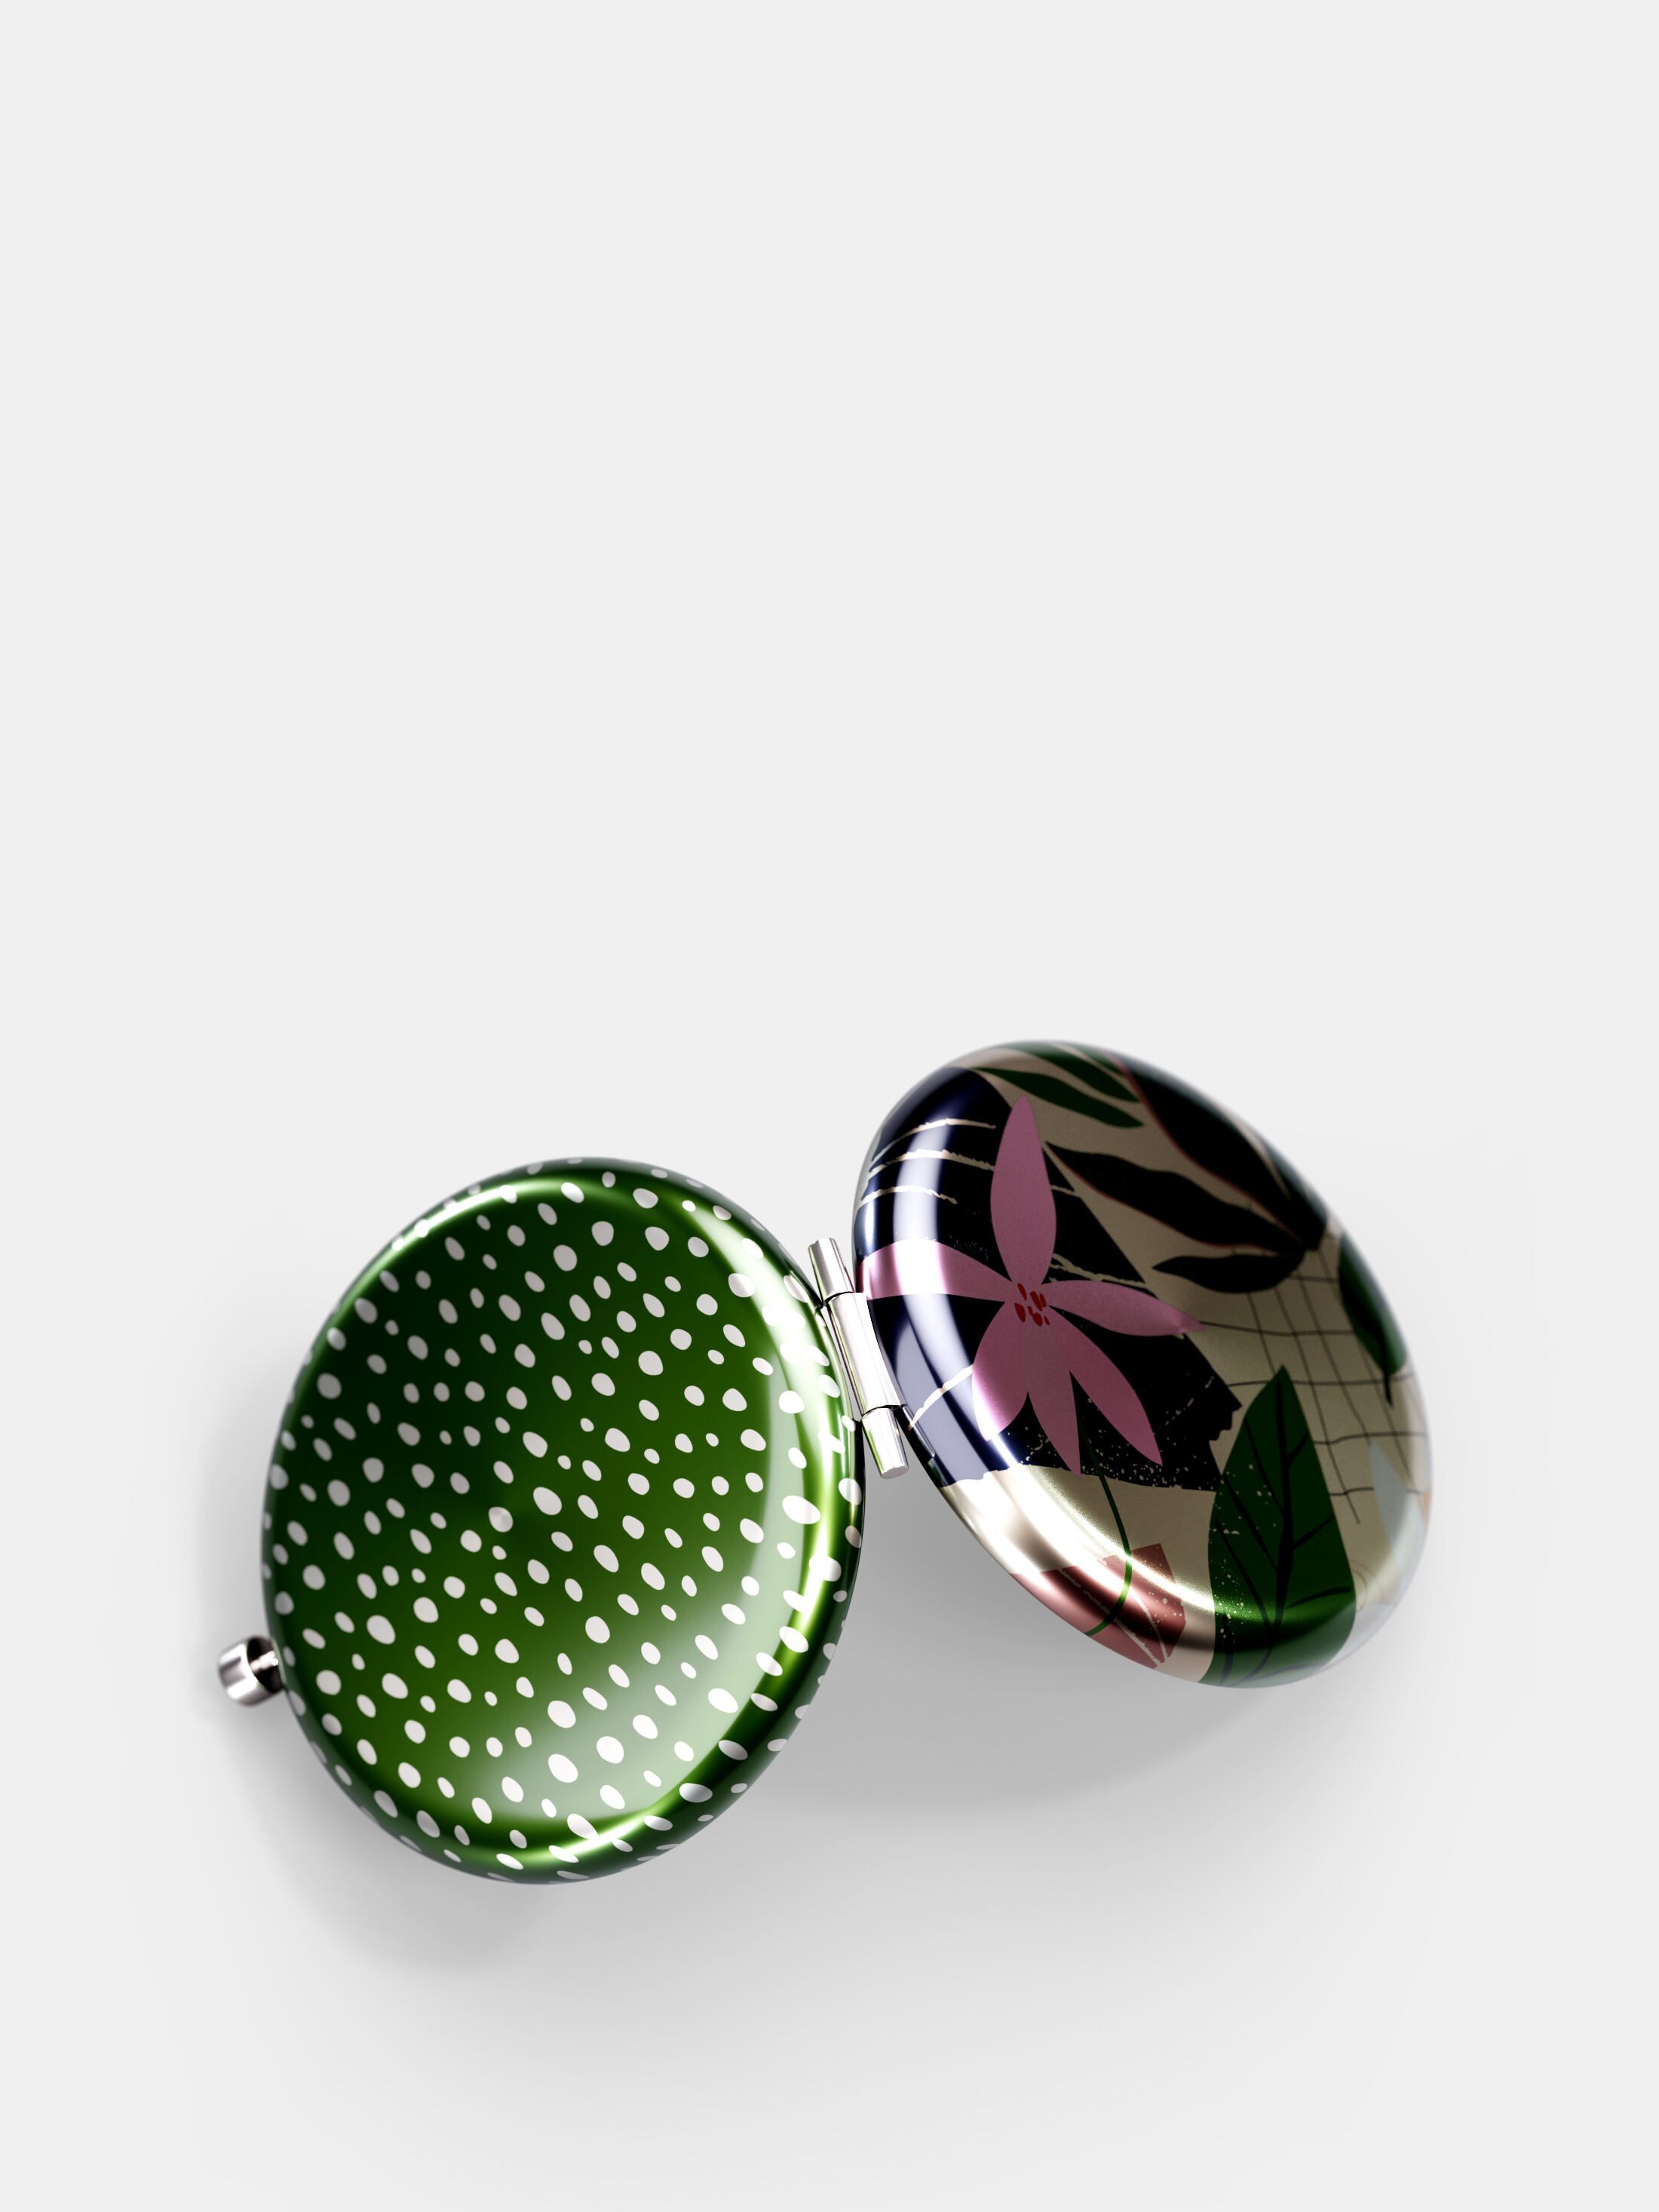 Design your own custom pocket mirrors with different patterns